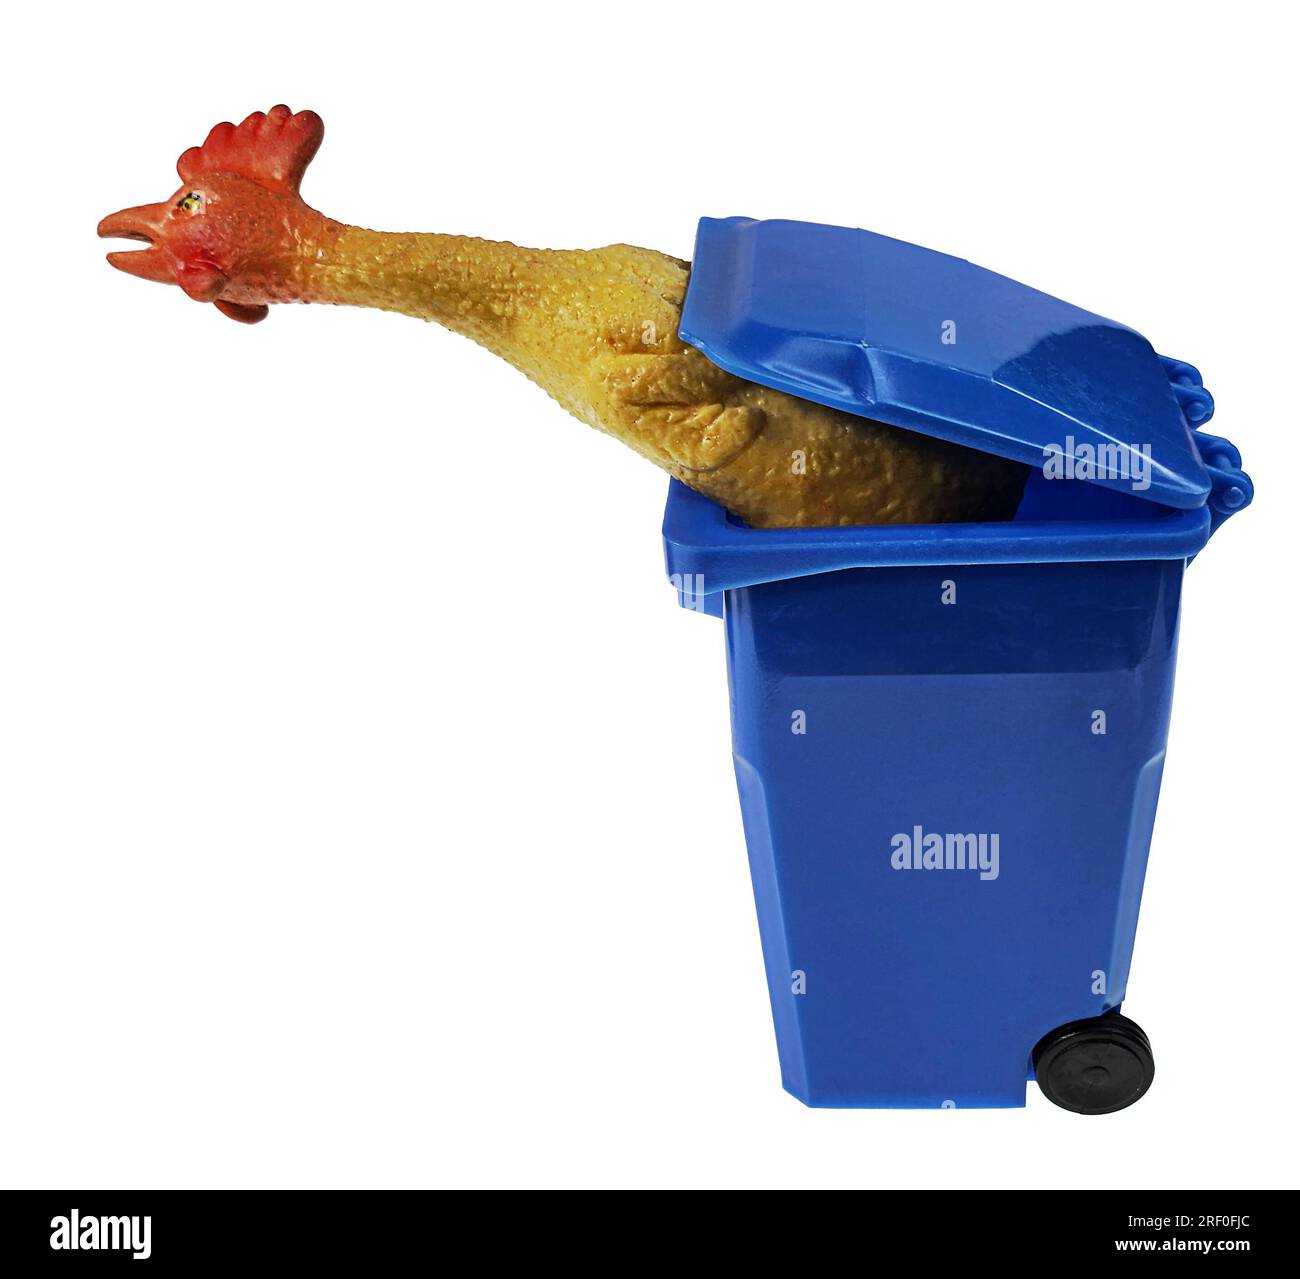 Recycling old jokes with a Rubber chicken in a recycling bin Stock Photo